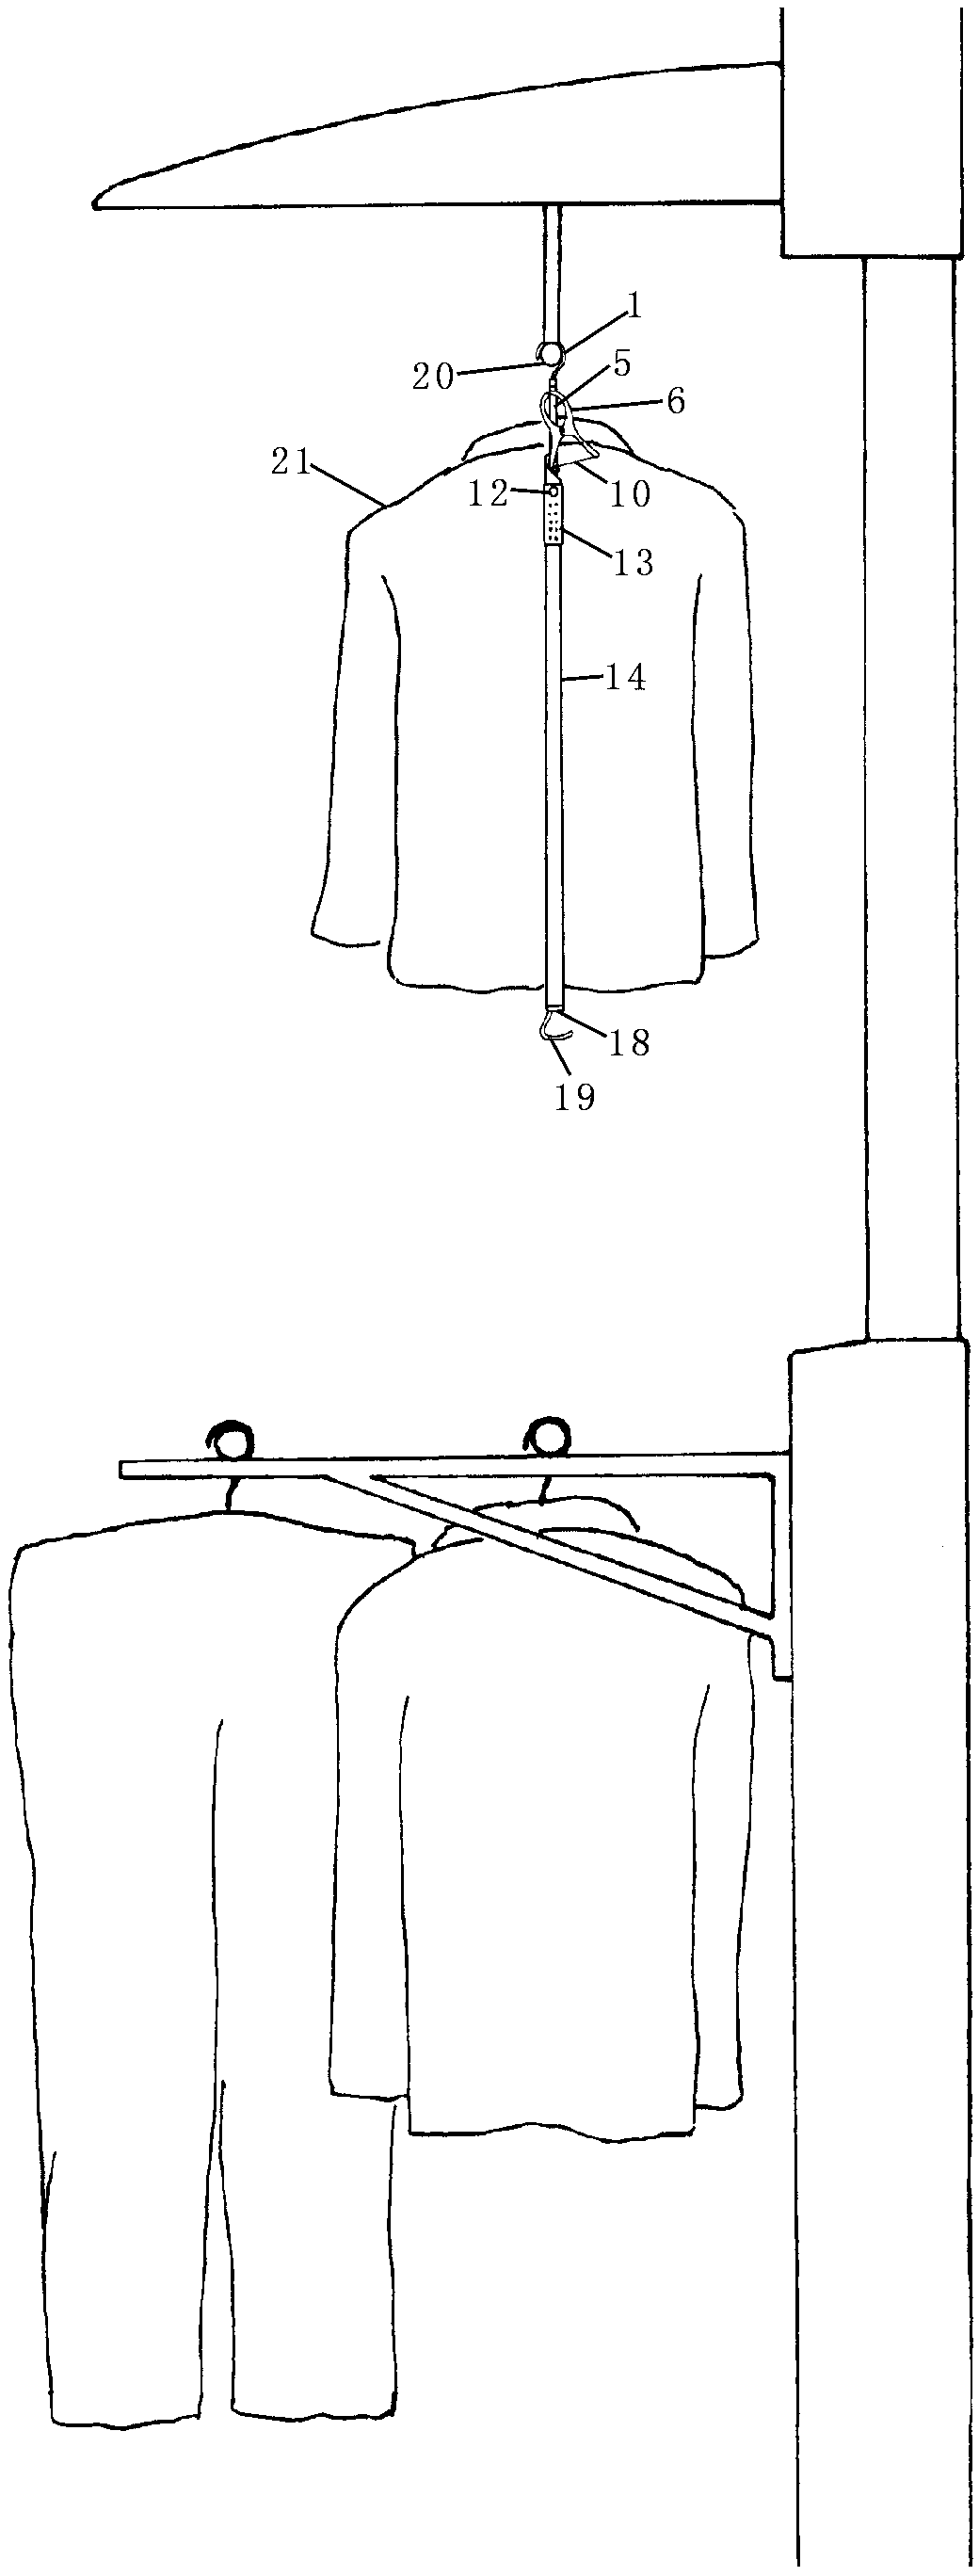 Hanger provided with long vertical handle